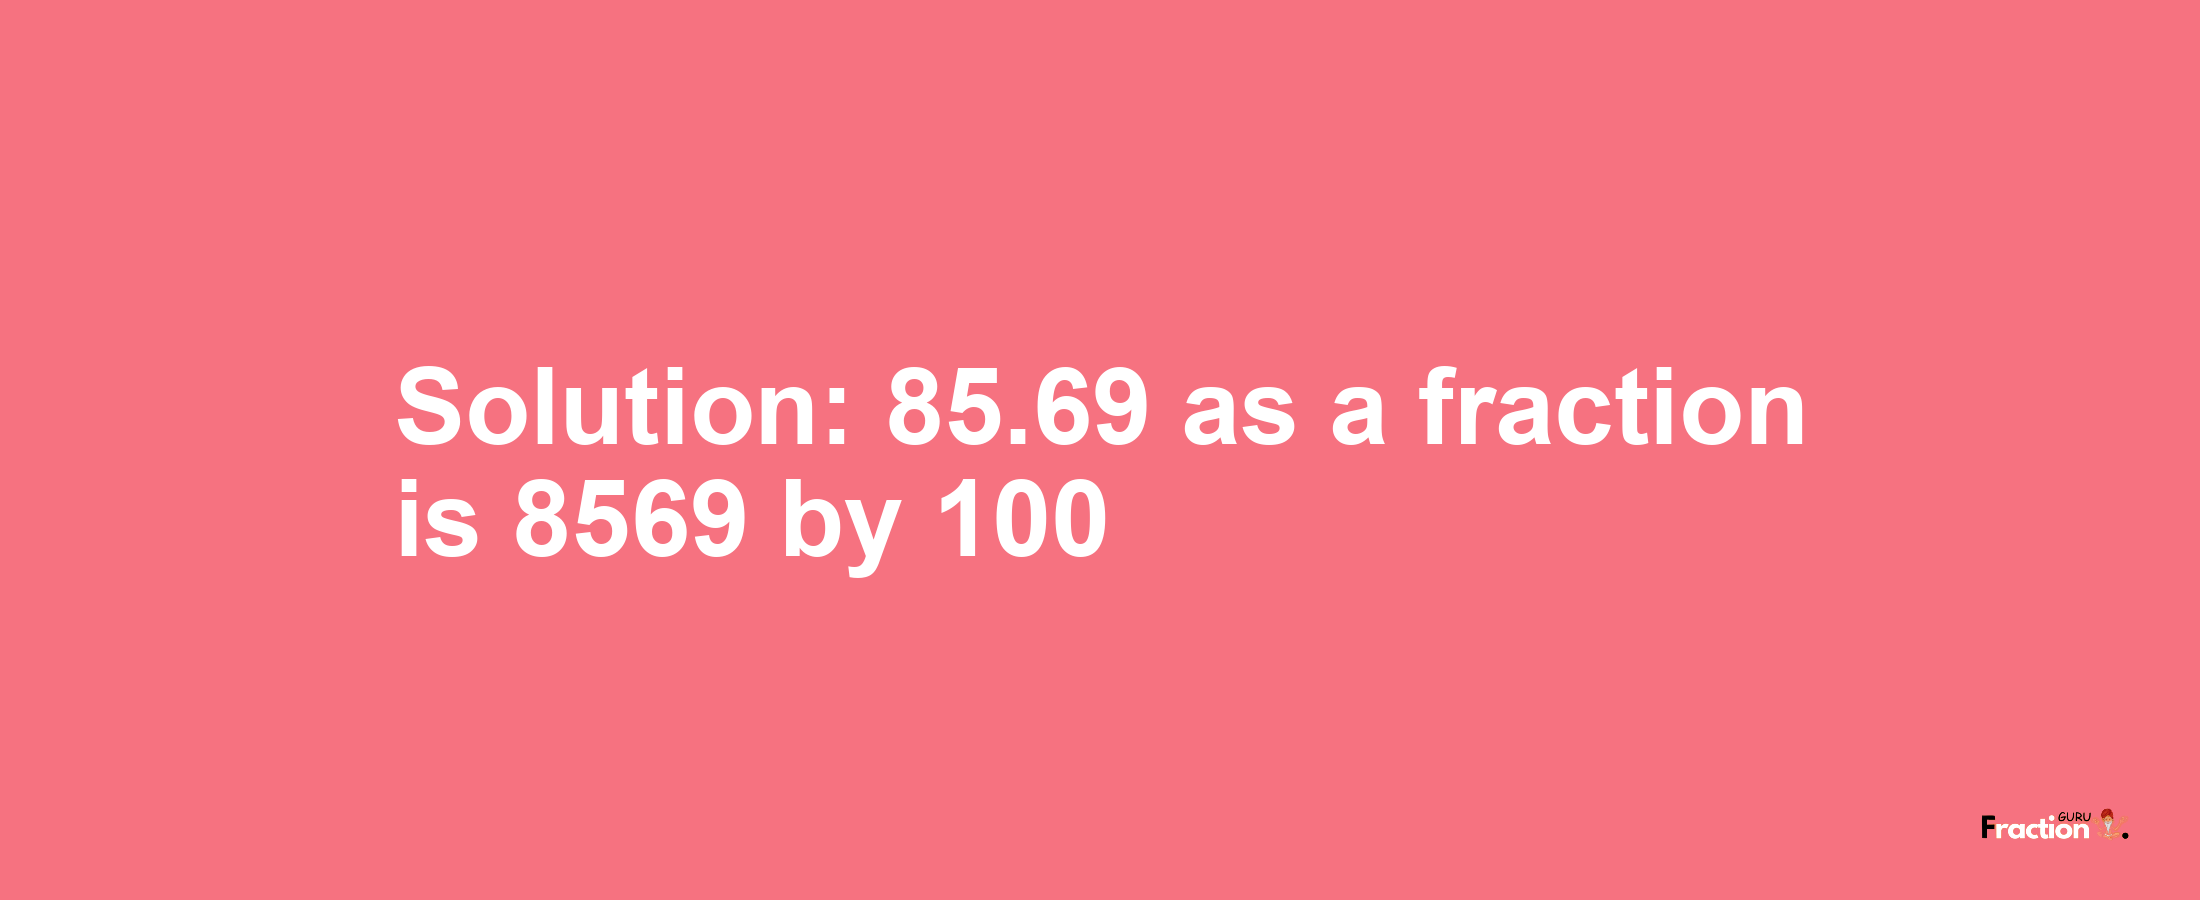 Solution:85.69 as a fraction is 8569/100